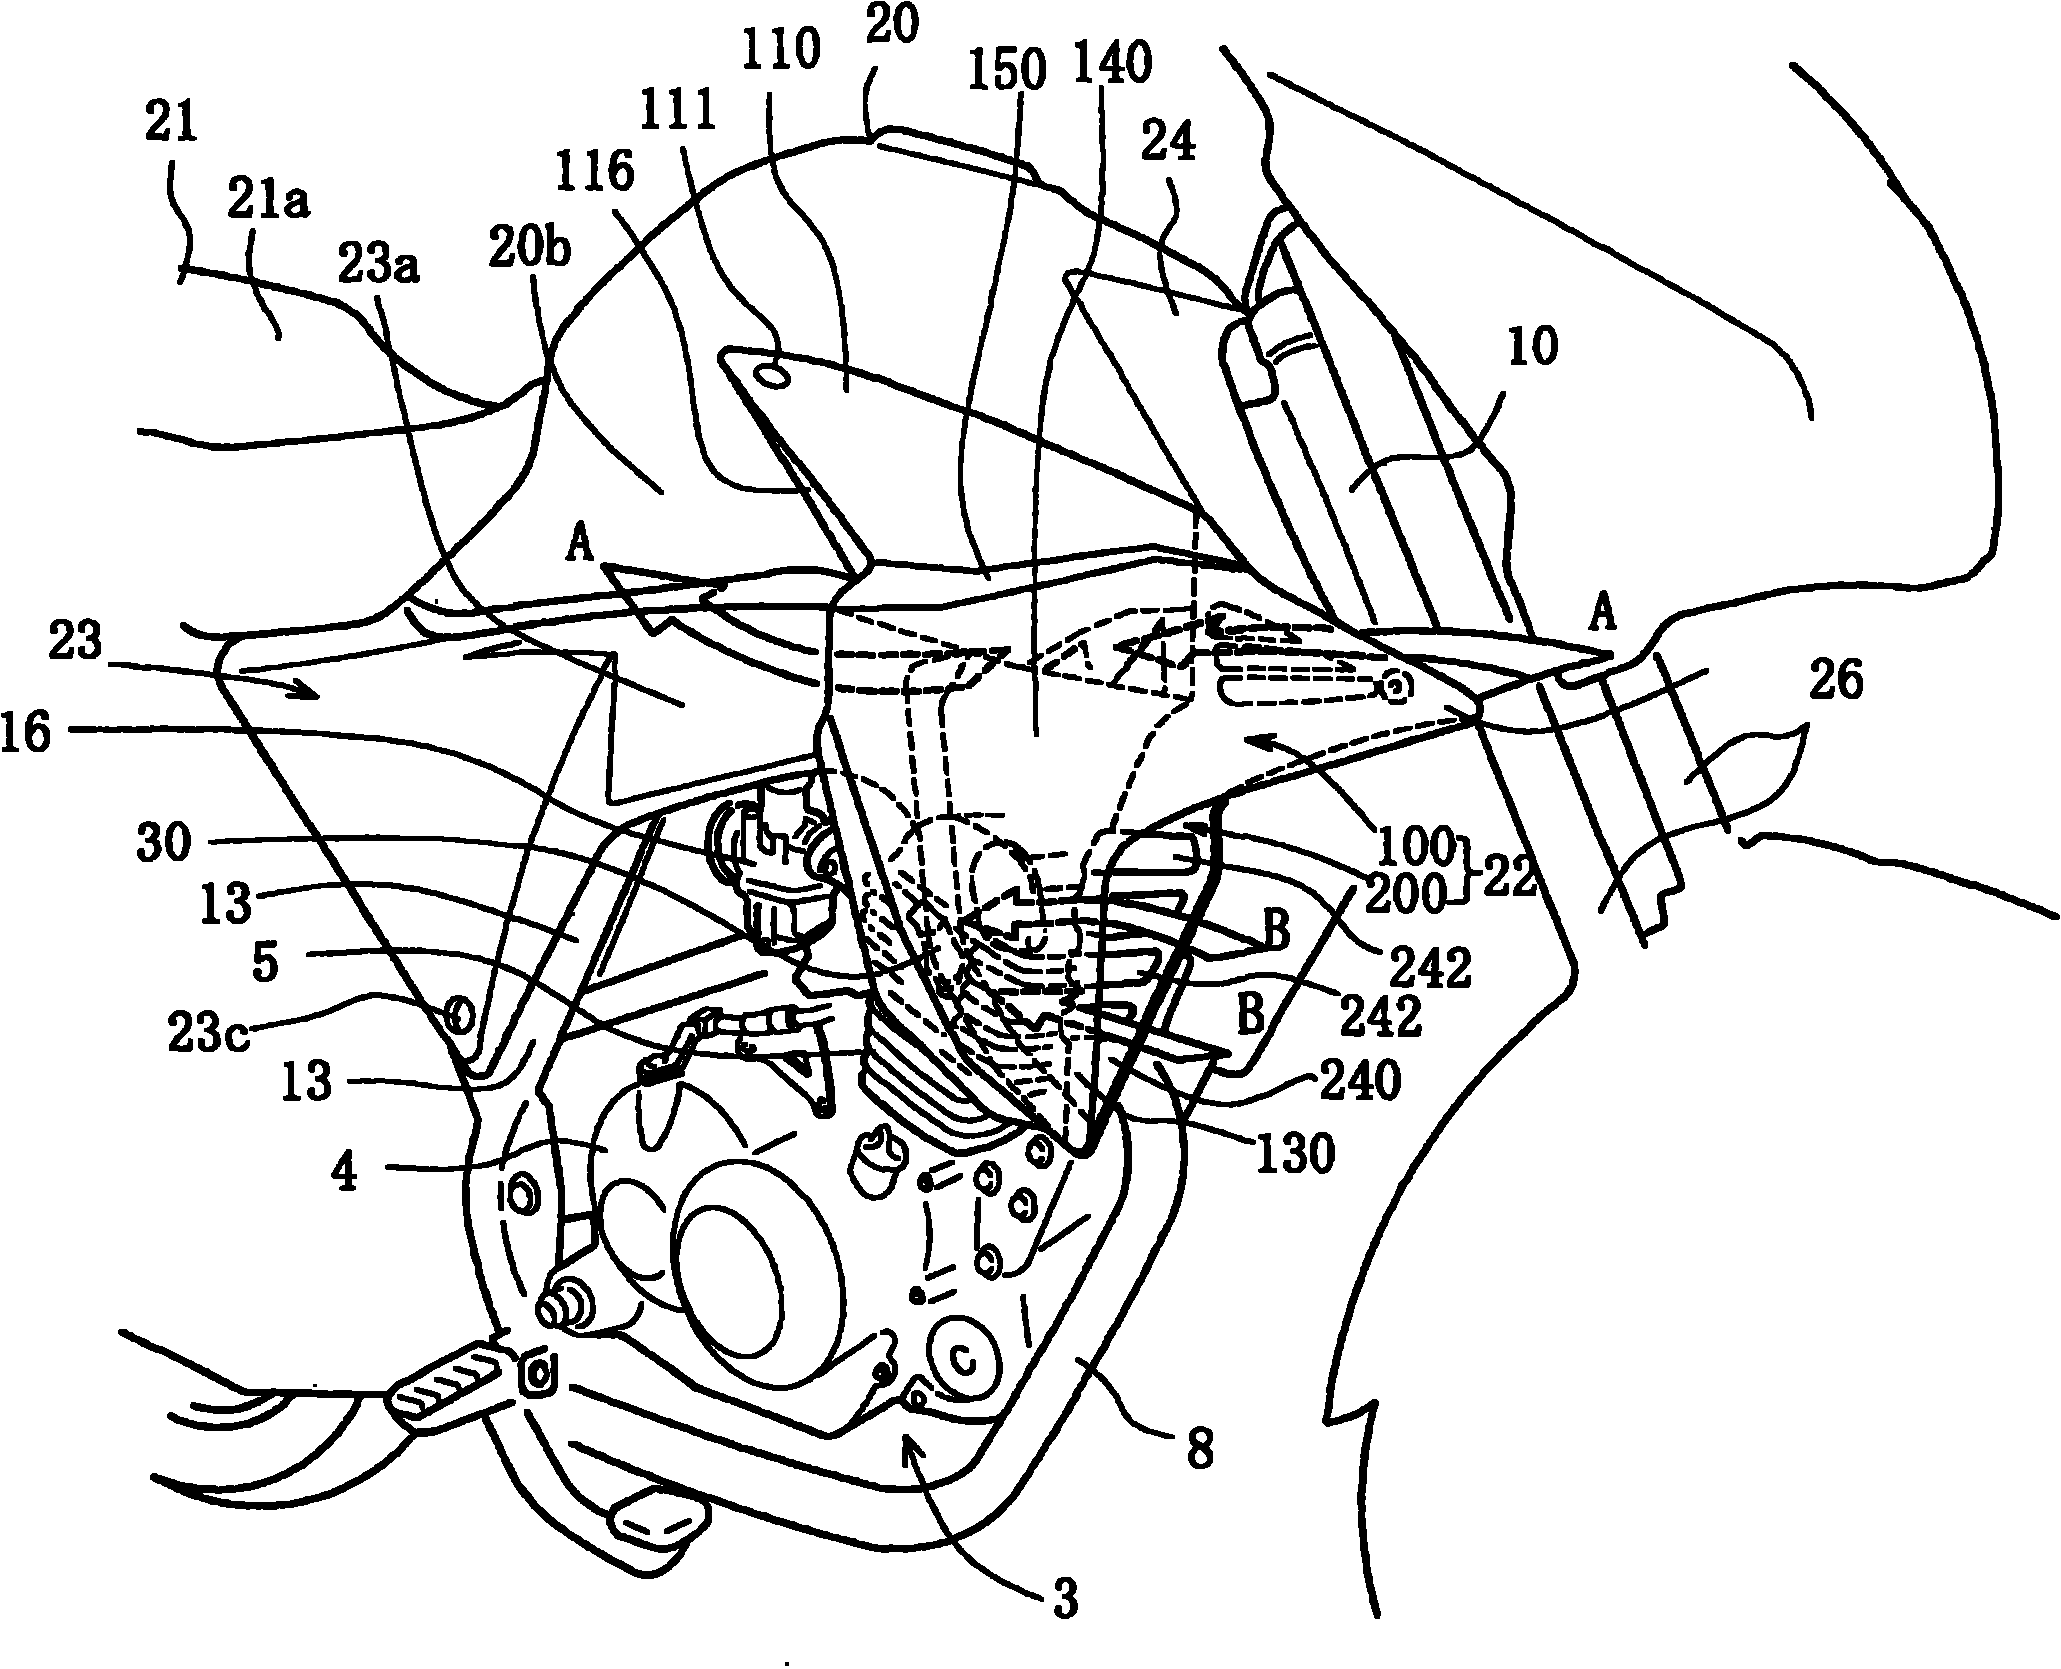 Air guide structure of motorcycle